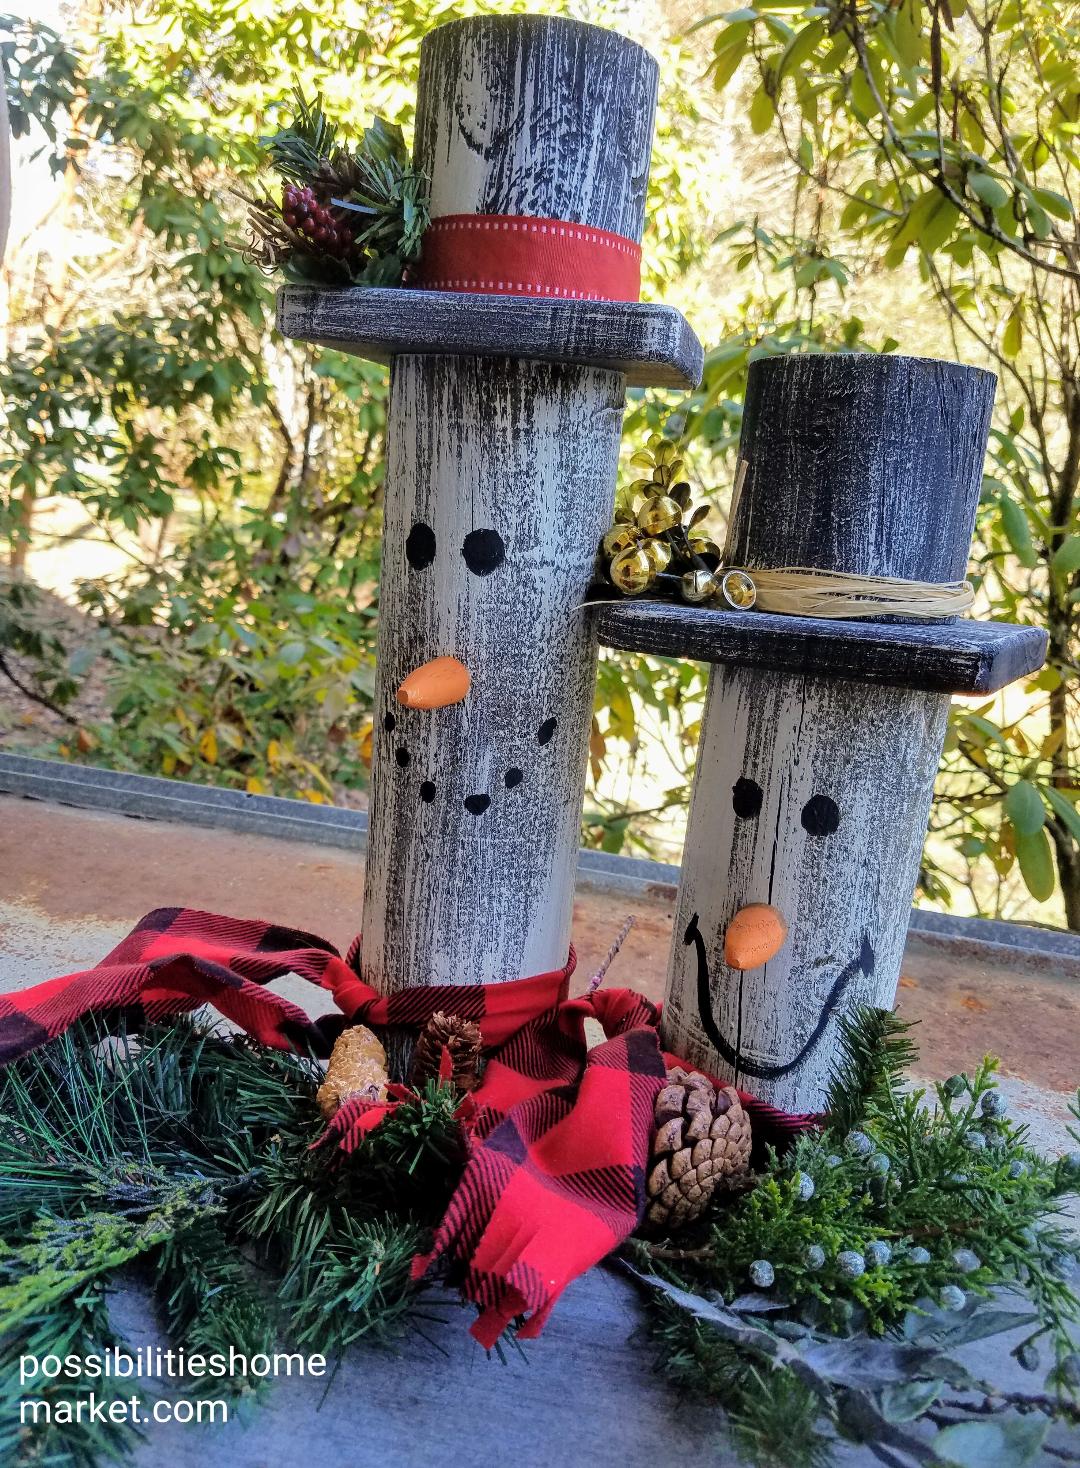 Easy Snowman Craft Project Using DIY Paint and a Fence Post